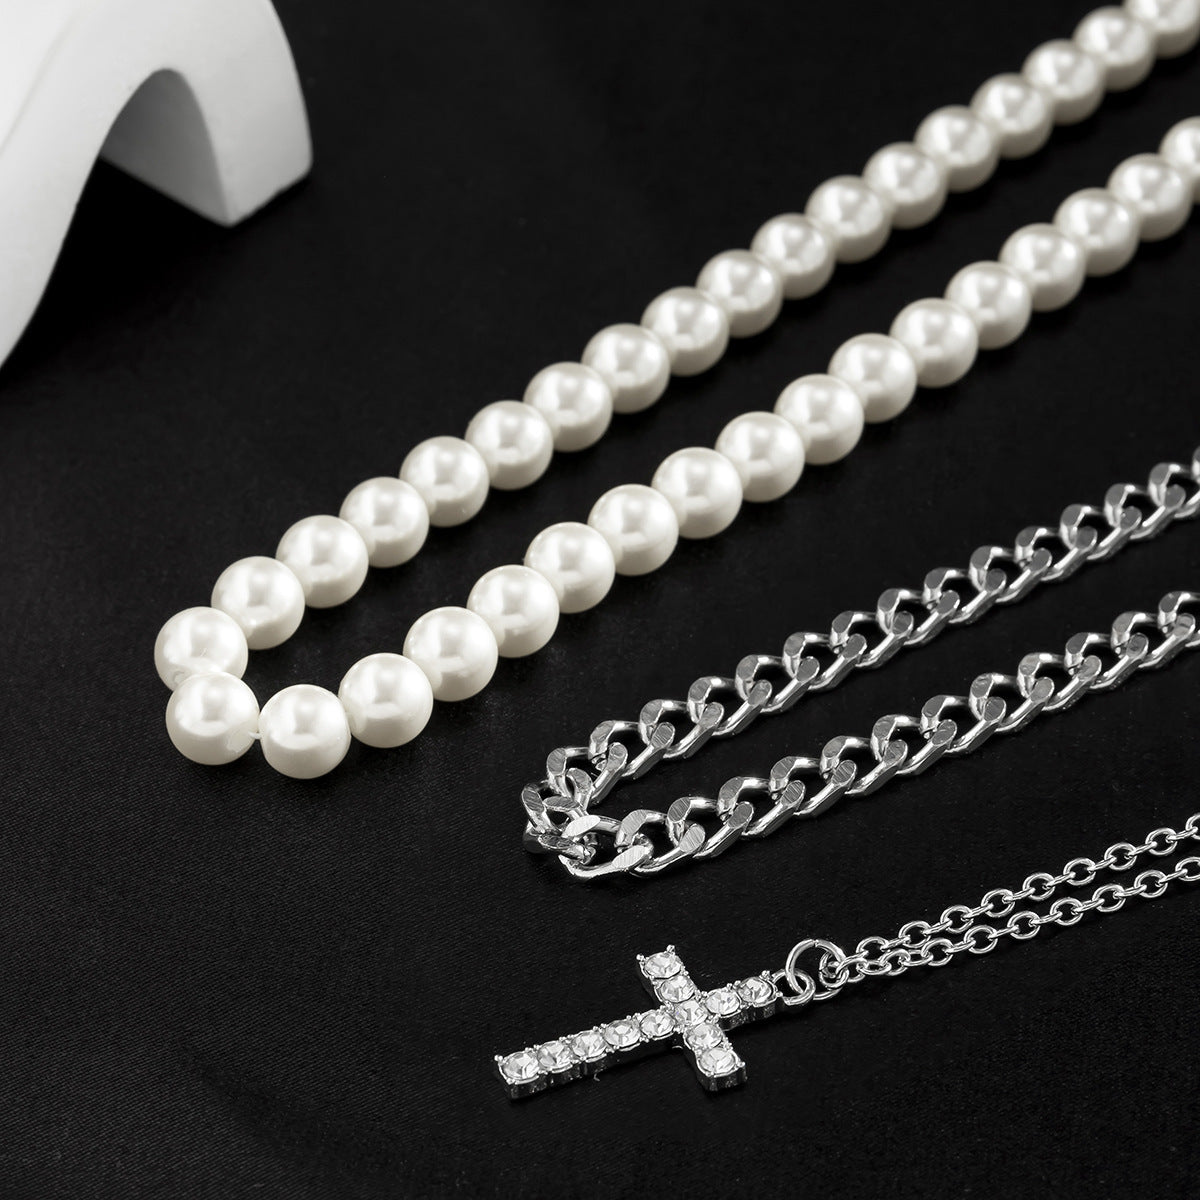 Fashionable Three-Layer Diamond Cross with Pearl Pendant Necklace